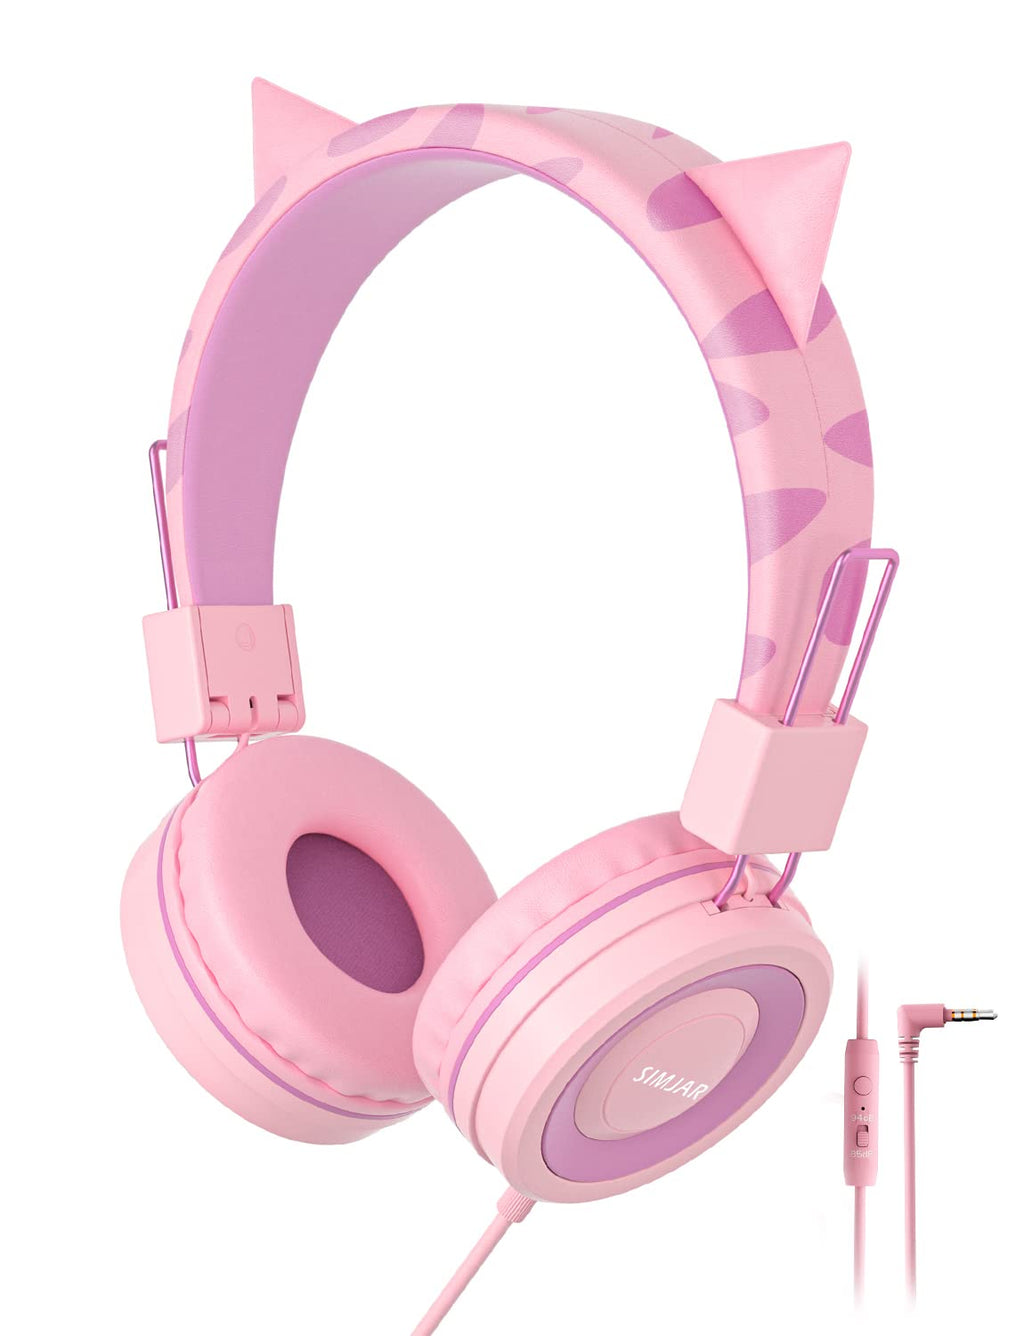 SIMJAR Cat Ear Kids Headphones with Microphone for School, Volume Limiter 85/94dB, Wired Girls Headphones with Foldable Design for Online Learning/Travel/Tablet/iPad (Pink) Pink